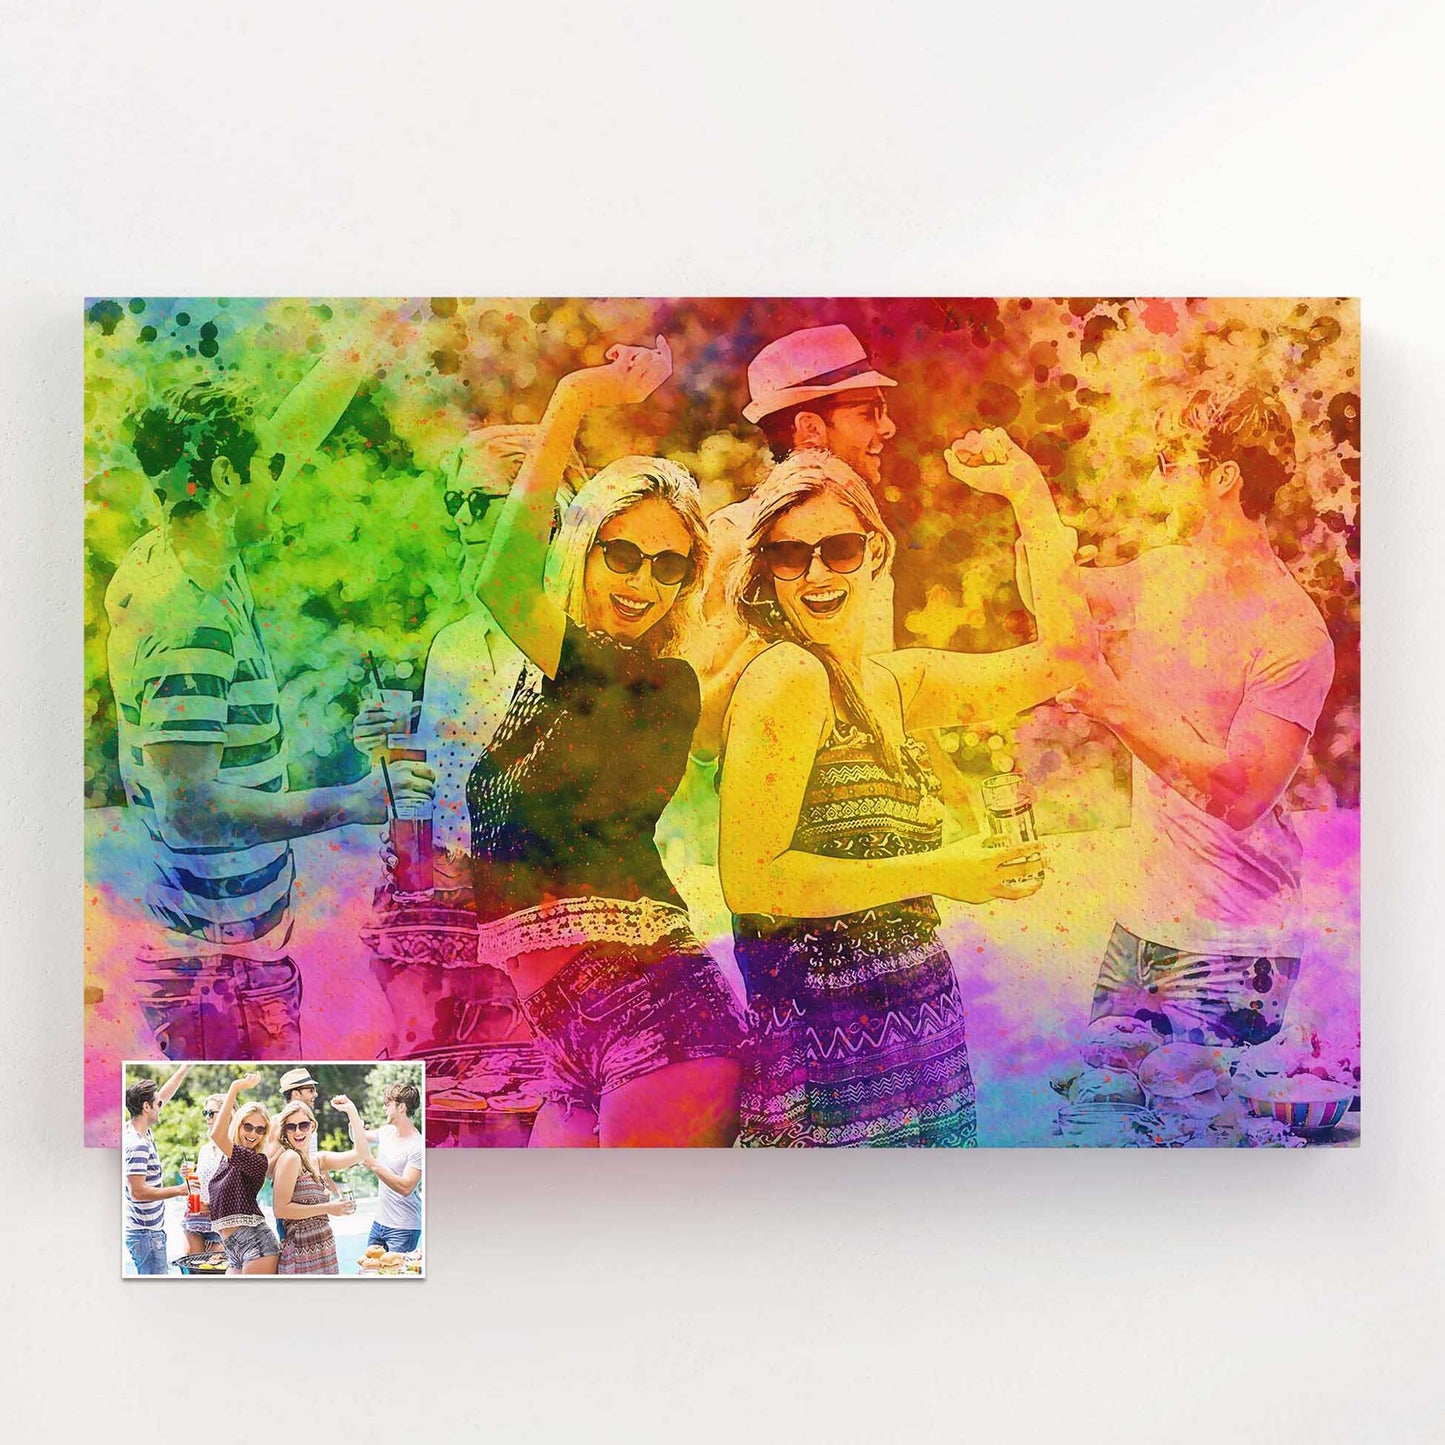 Dive into a world of vibrant hues and creative expression with Personalised Splash of Colours Canvas. This exquisite artwork combines the precision of painting from photo with the fluidity and brilliance of watercolour and digital art